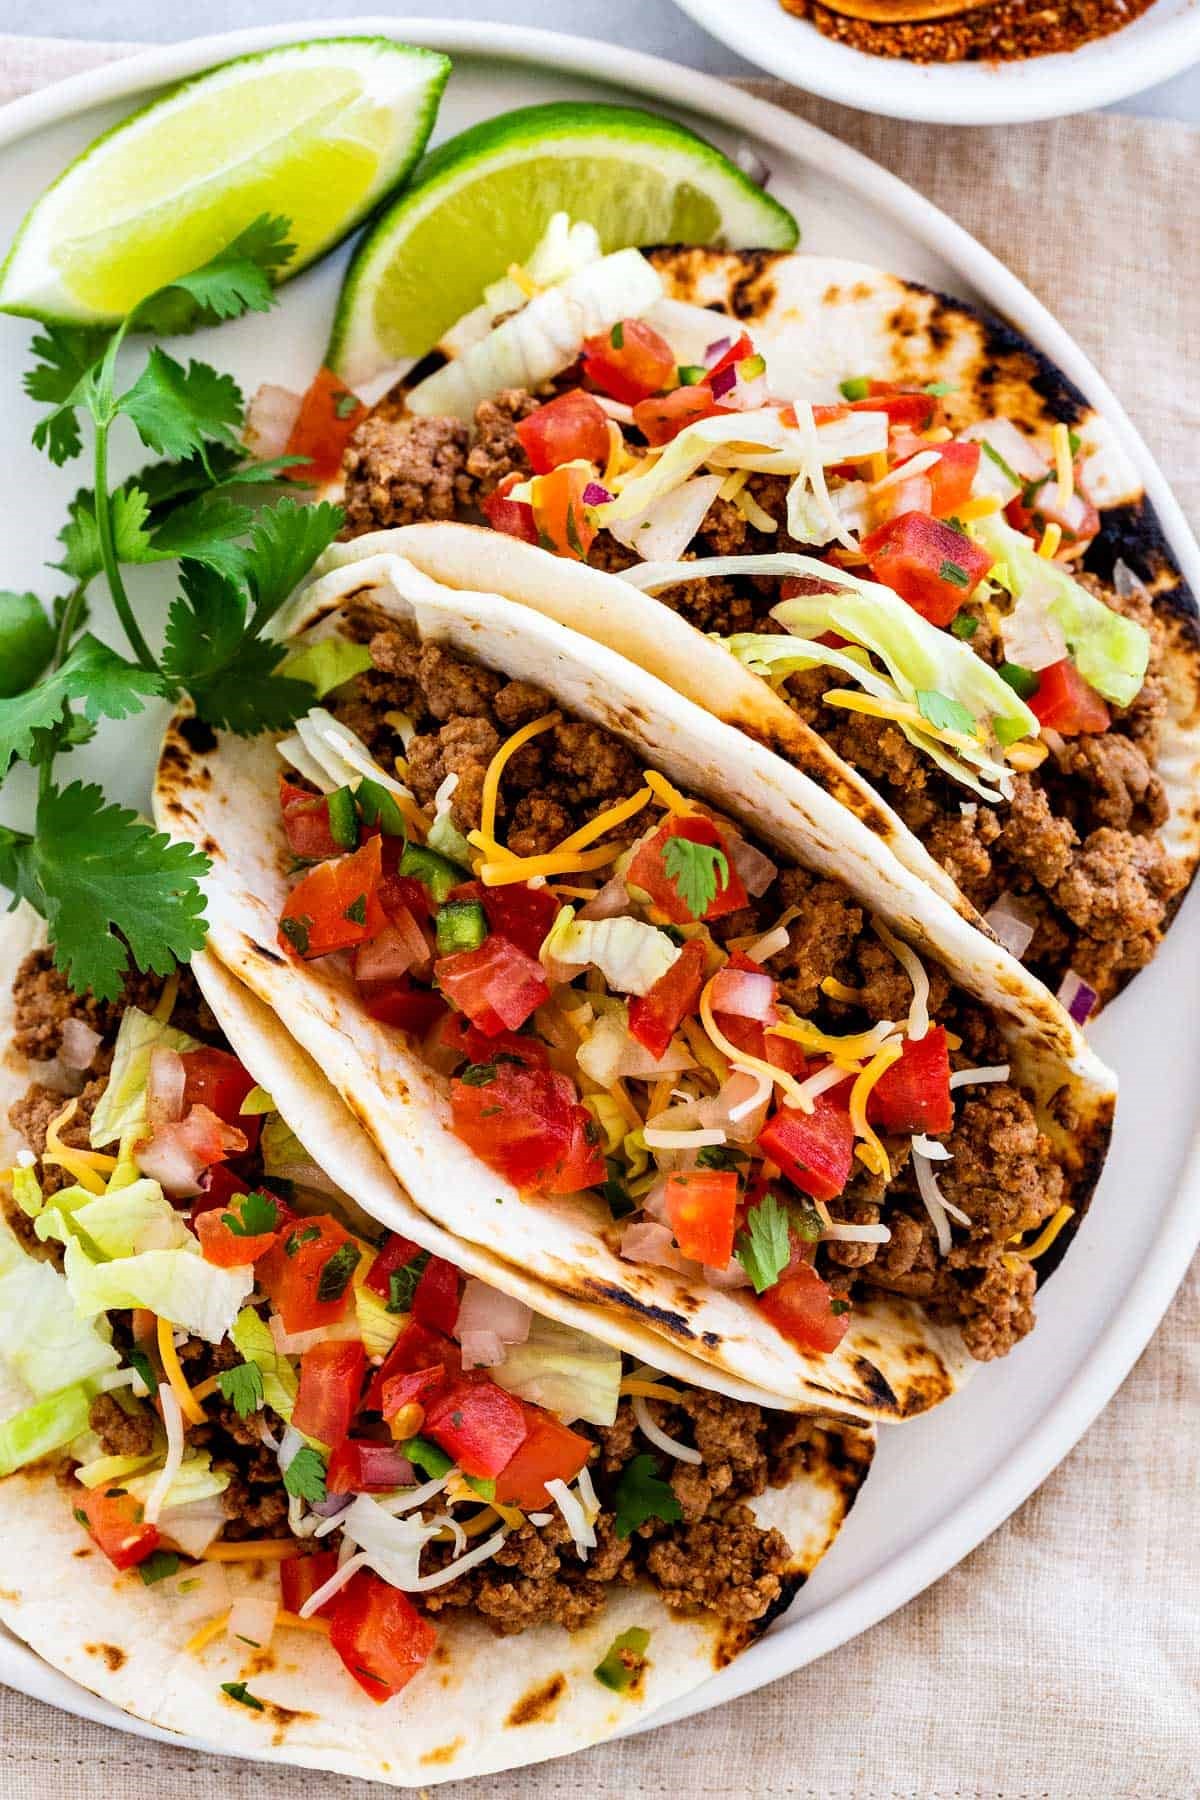 Taco Tuesday by Top Chef Winner - hero